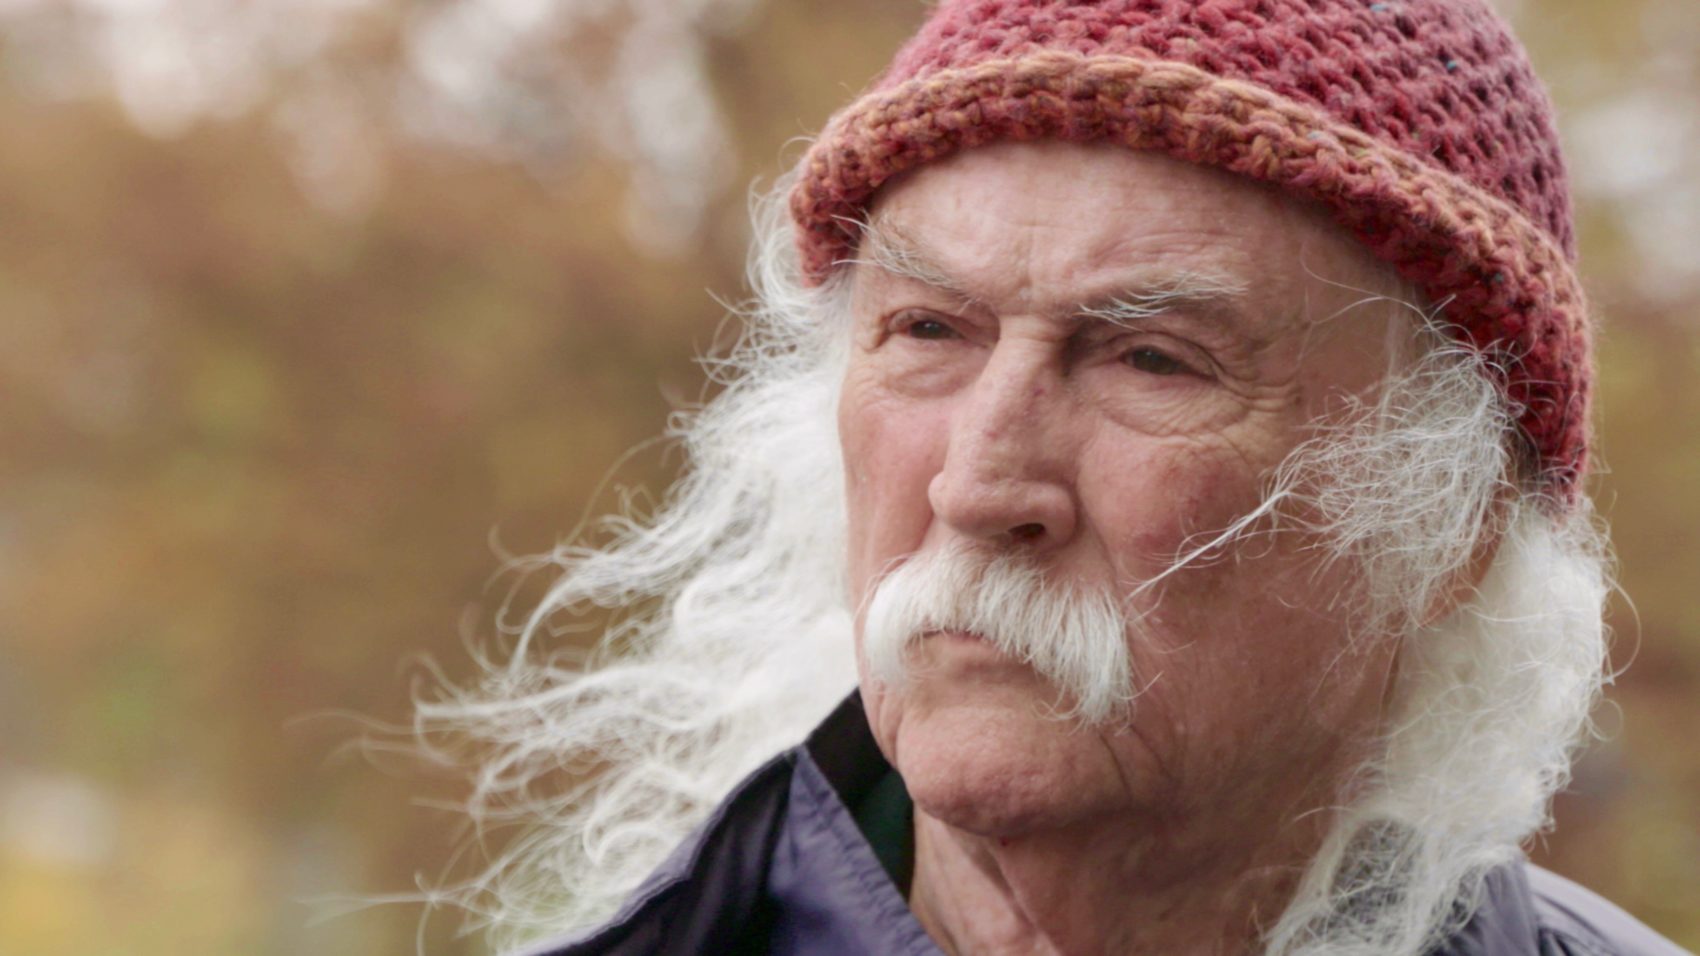 &quot;I've hurt a lot of people. I've helped a lot more. I just have to be able to look at it and understand it and learn from it,&quot; David Crosby tells Here & Now. The musician's life is the focus of the new documentary &quot;David Crosby: Remember My Name.&quot; (Courtesy of Sony Pictures Classics)